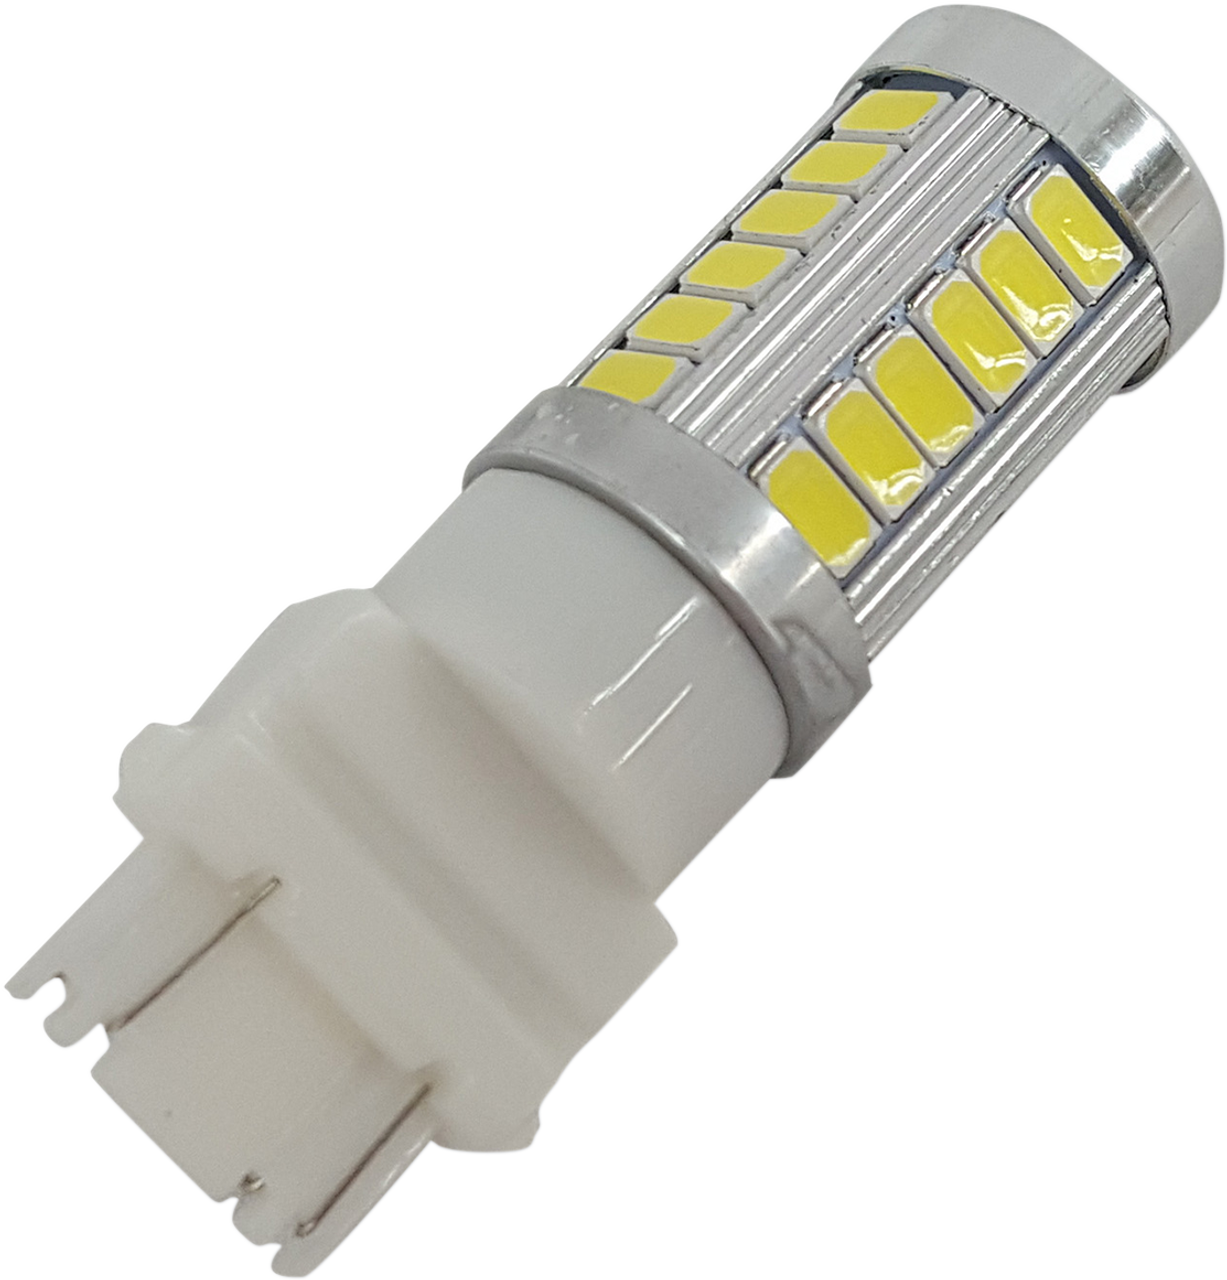 Strobing White Replacement Bulb - 3157-Style